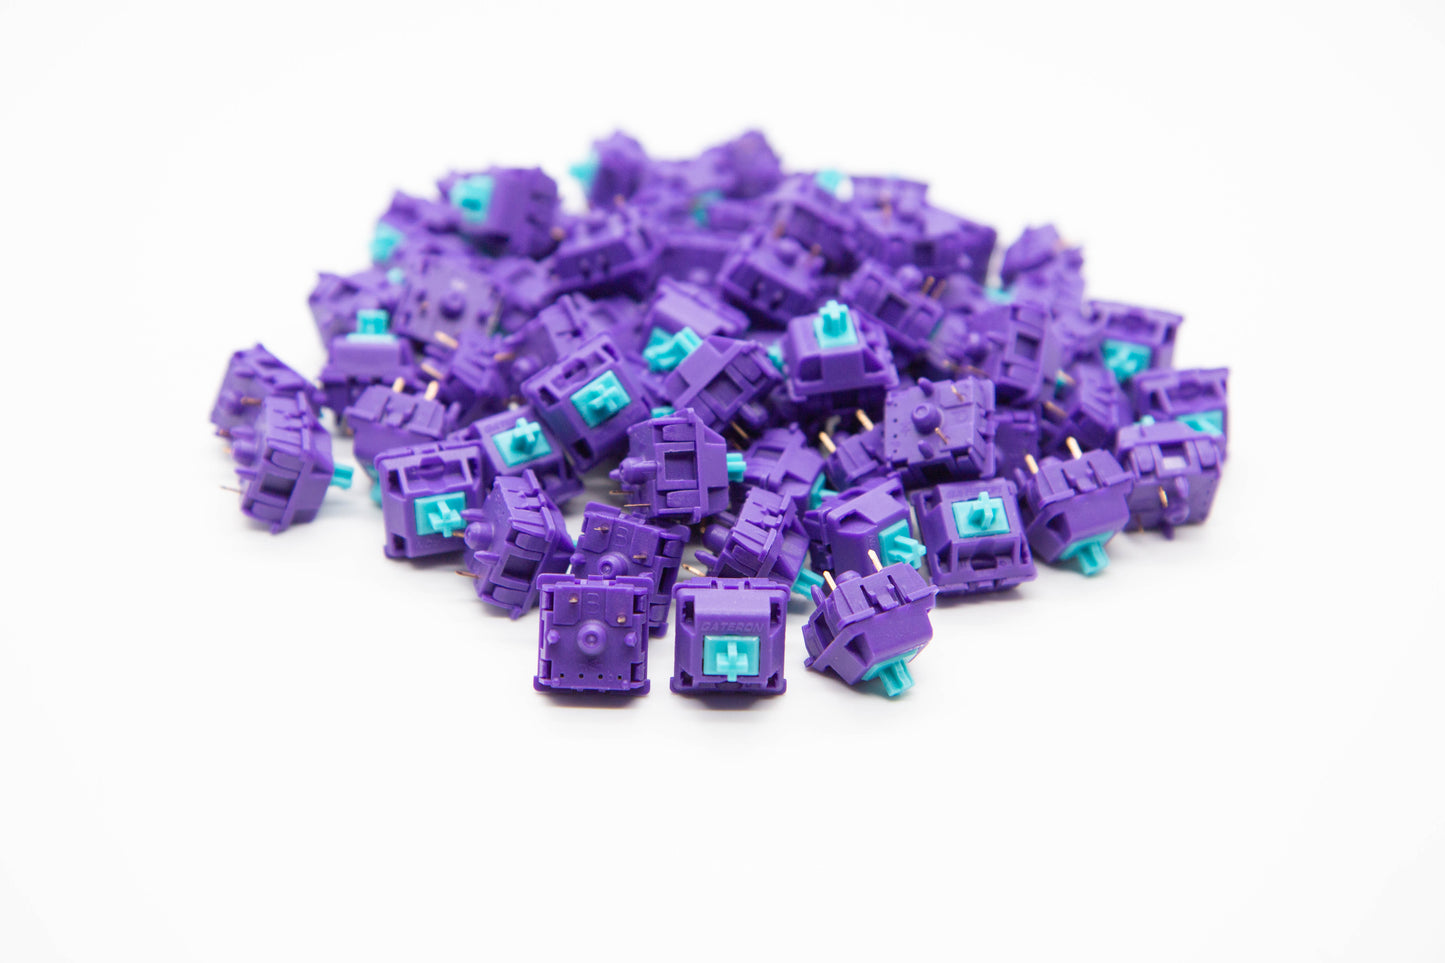 Close-up shot of a pile of KBDFans x MITO x Gateron Laser - 60g mechanical keyboard switches featuring purple housing and teal stems